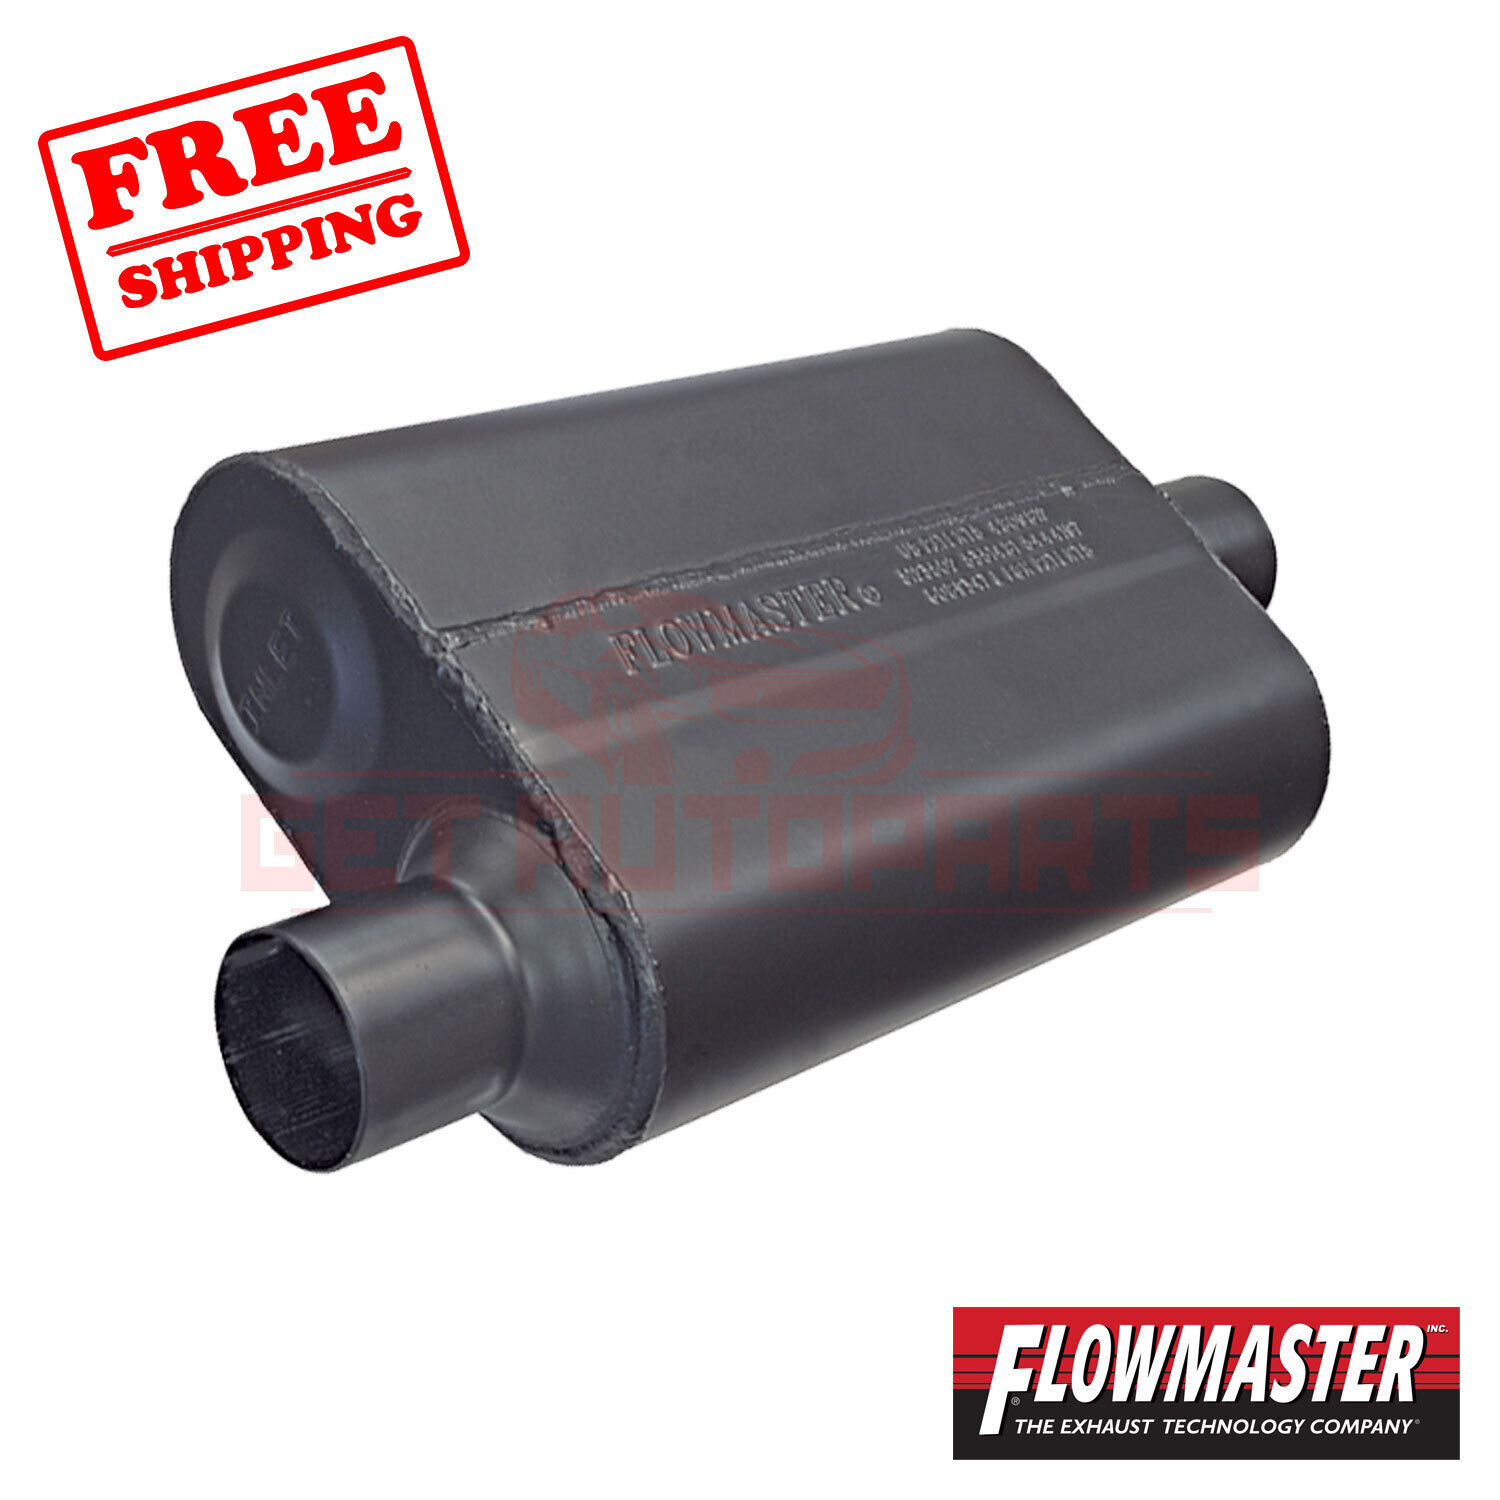 FlowMaster Exhaust Muffler for Plymouth Belvedere 62-70